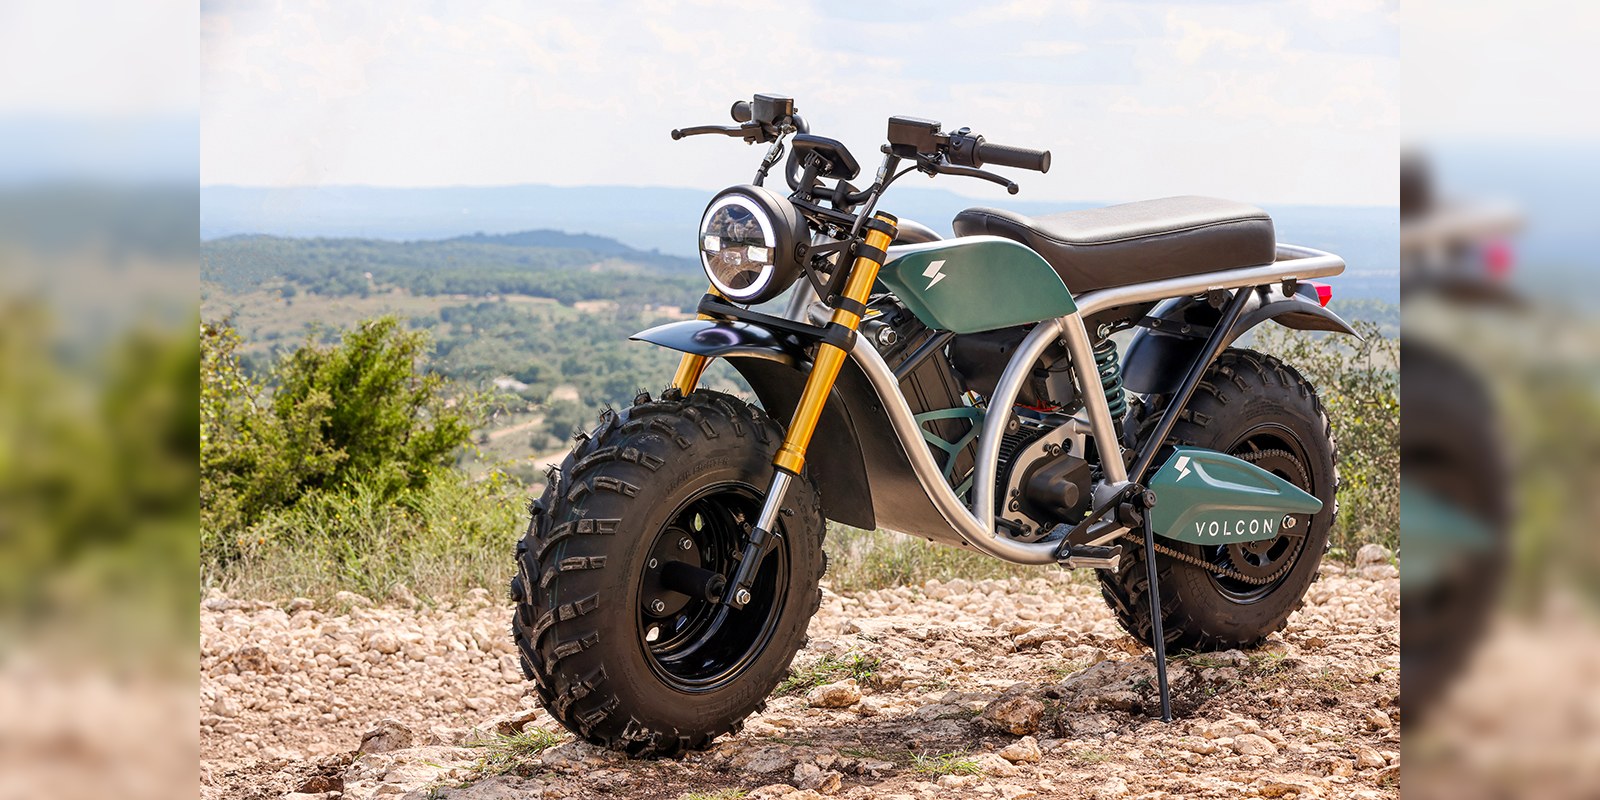 Watch: Volcon Grunt off-road electric motorcycle seen in new testing video